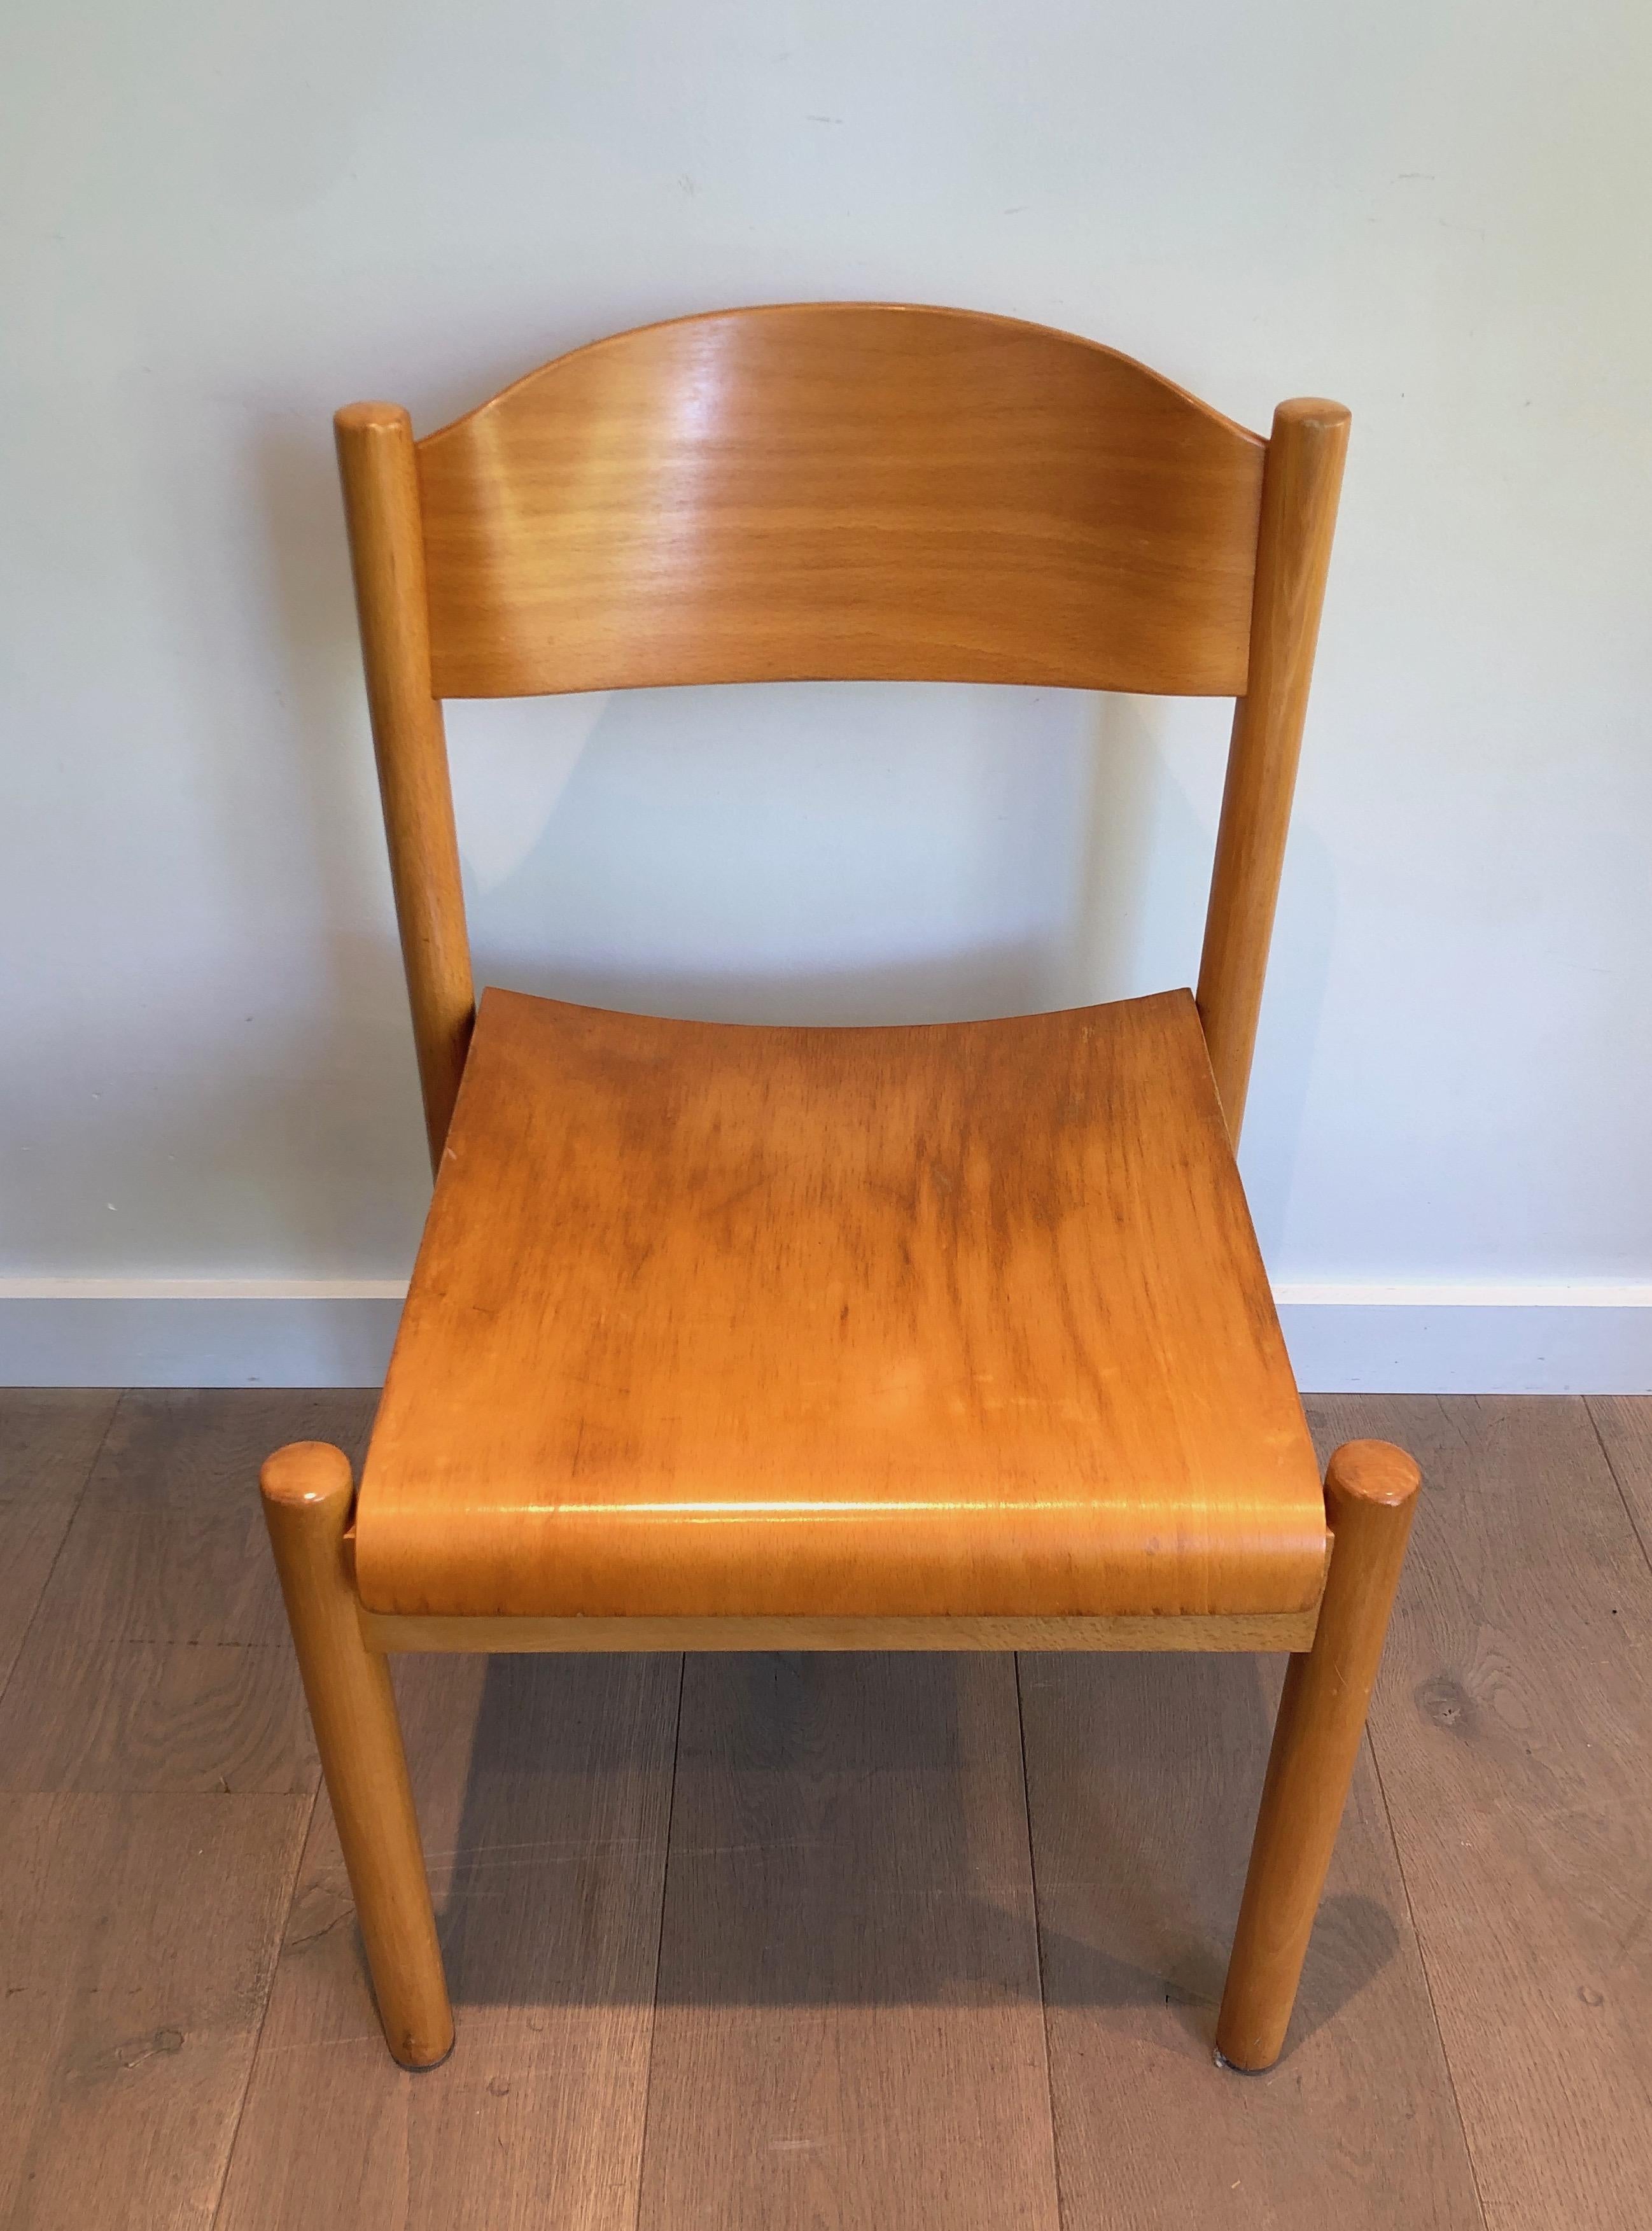 Set of 6 Stackable Pine Chairs, German Work by Karl Klipper, Circa 1970 For Sale 2